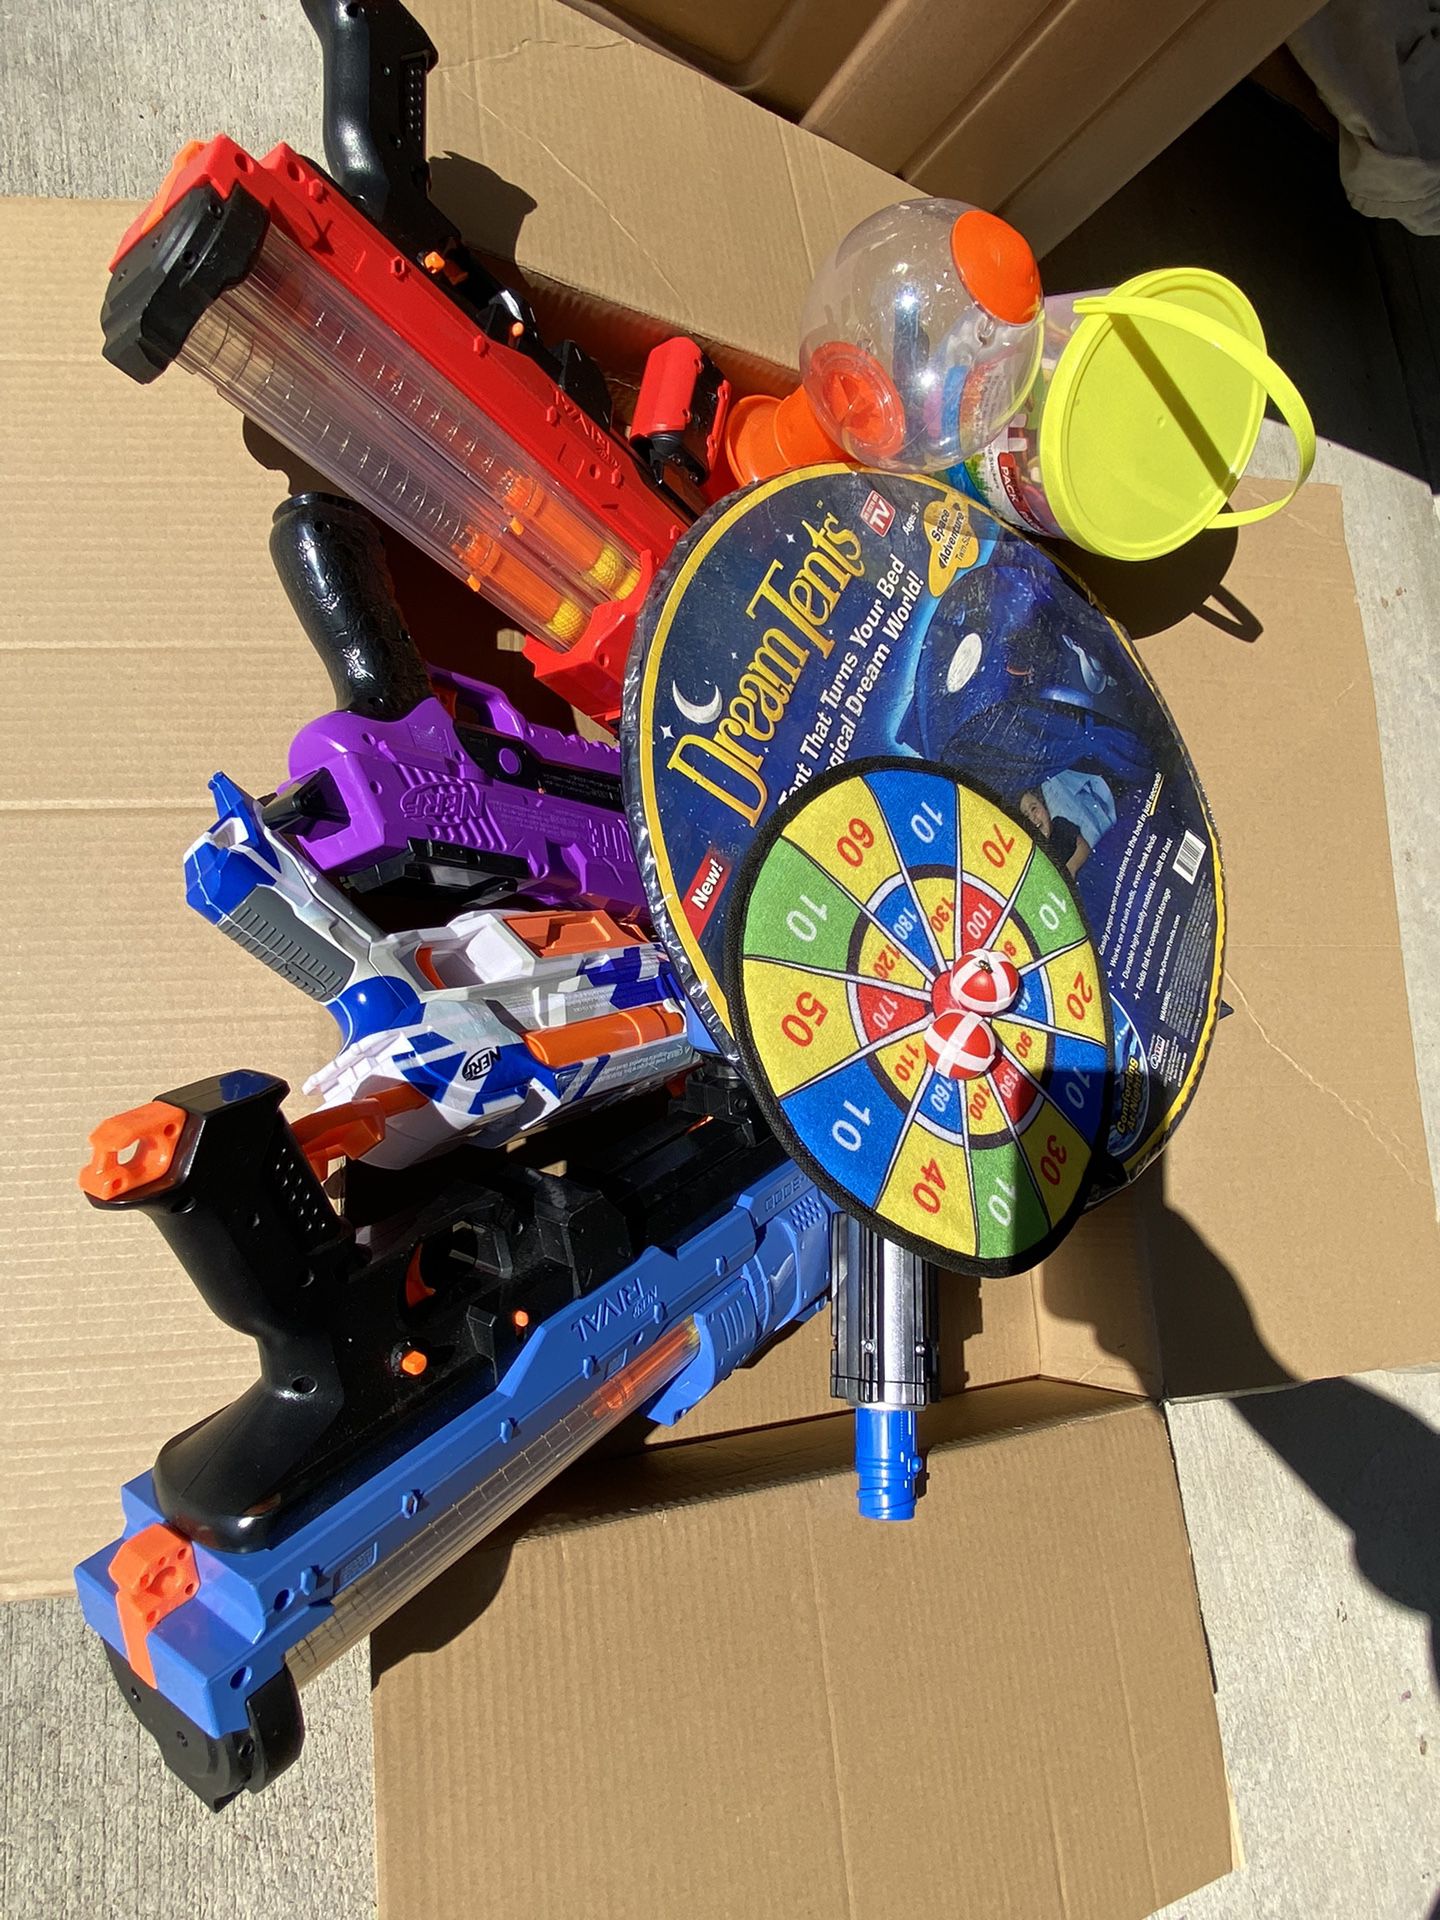 Children's Toys, Drone, Nerf Guns , Board Games, Puzzles Etc. 